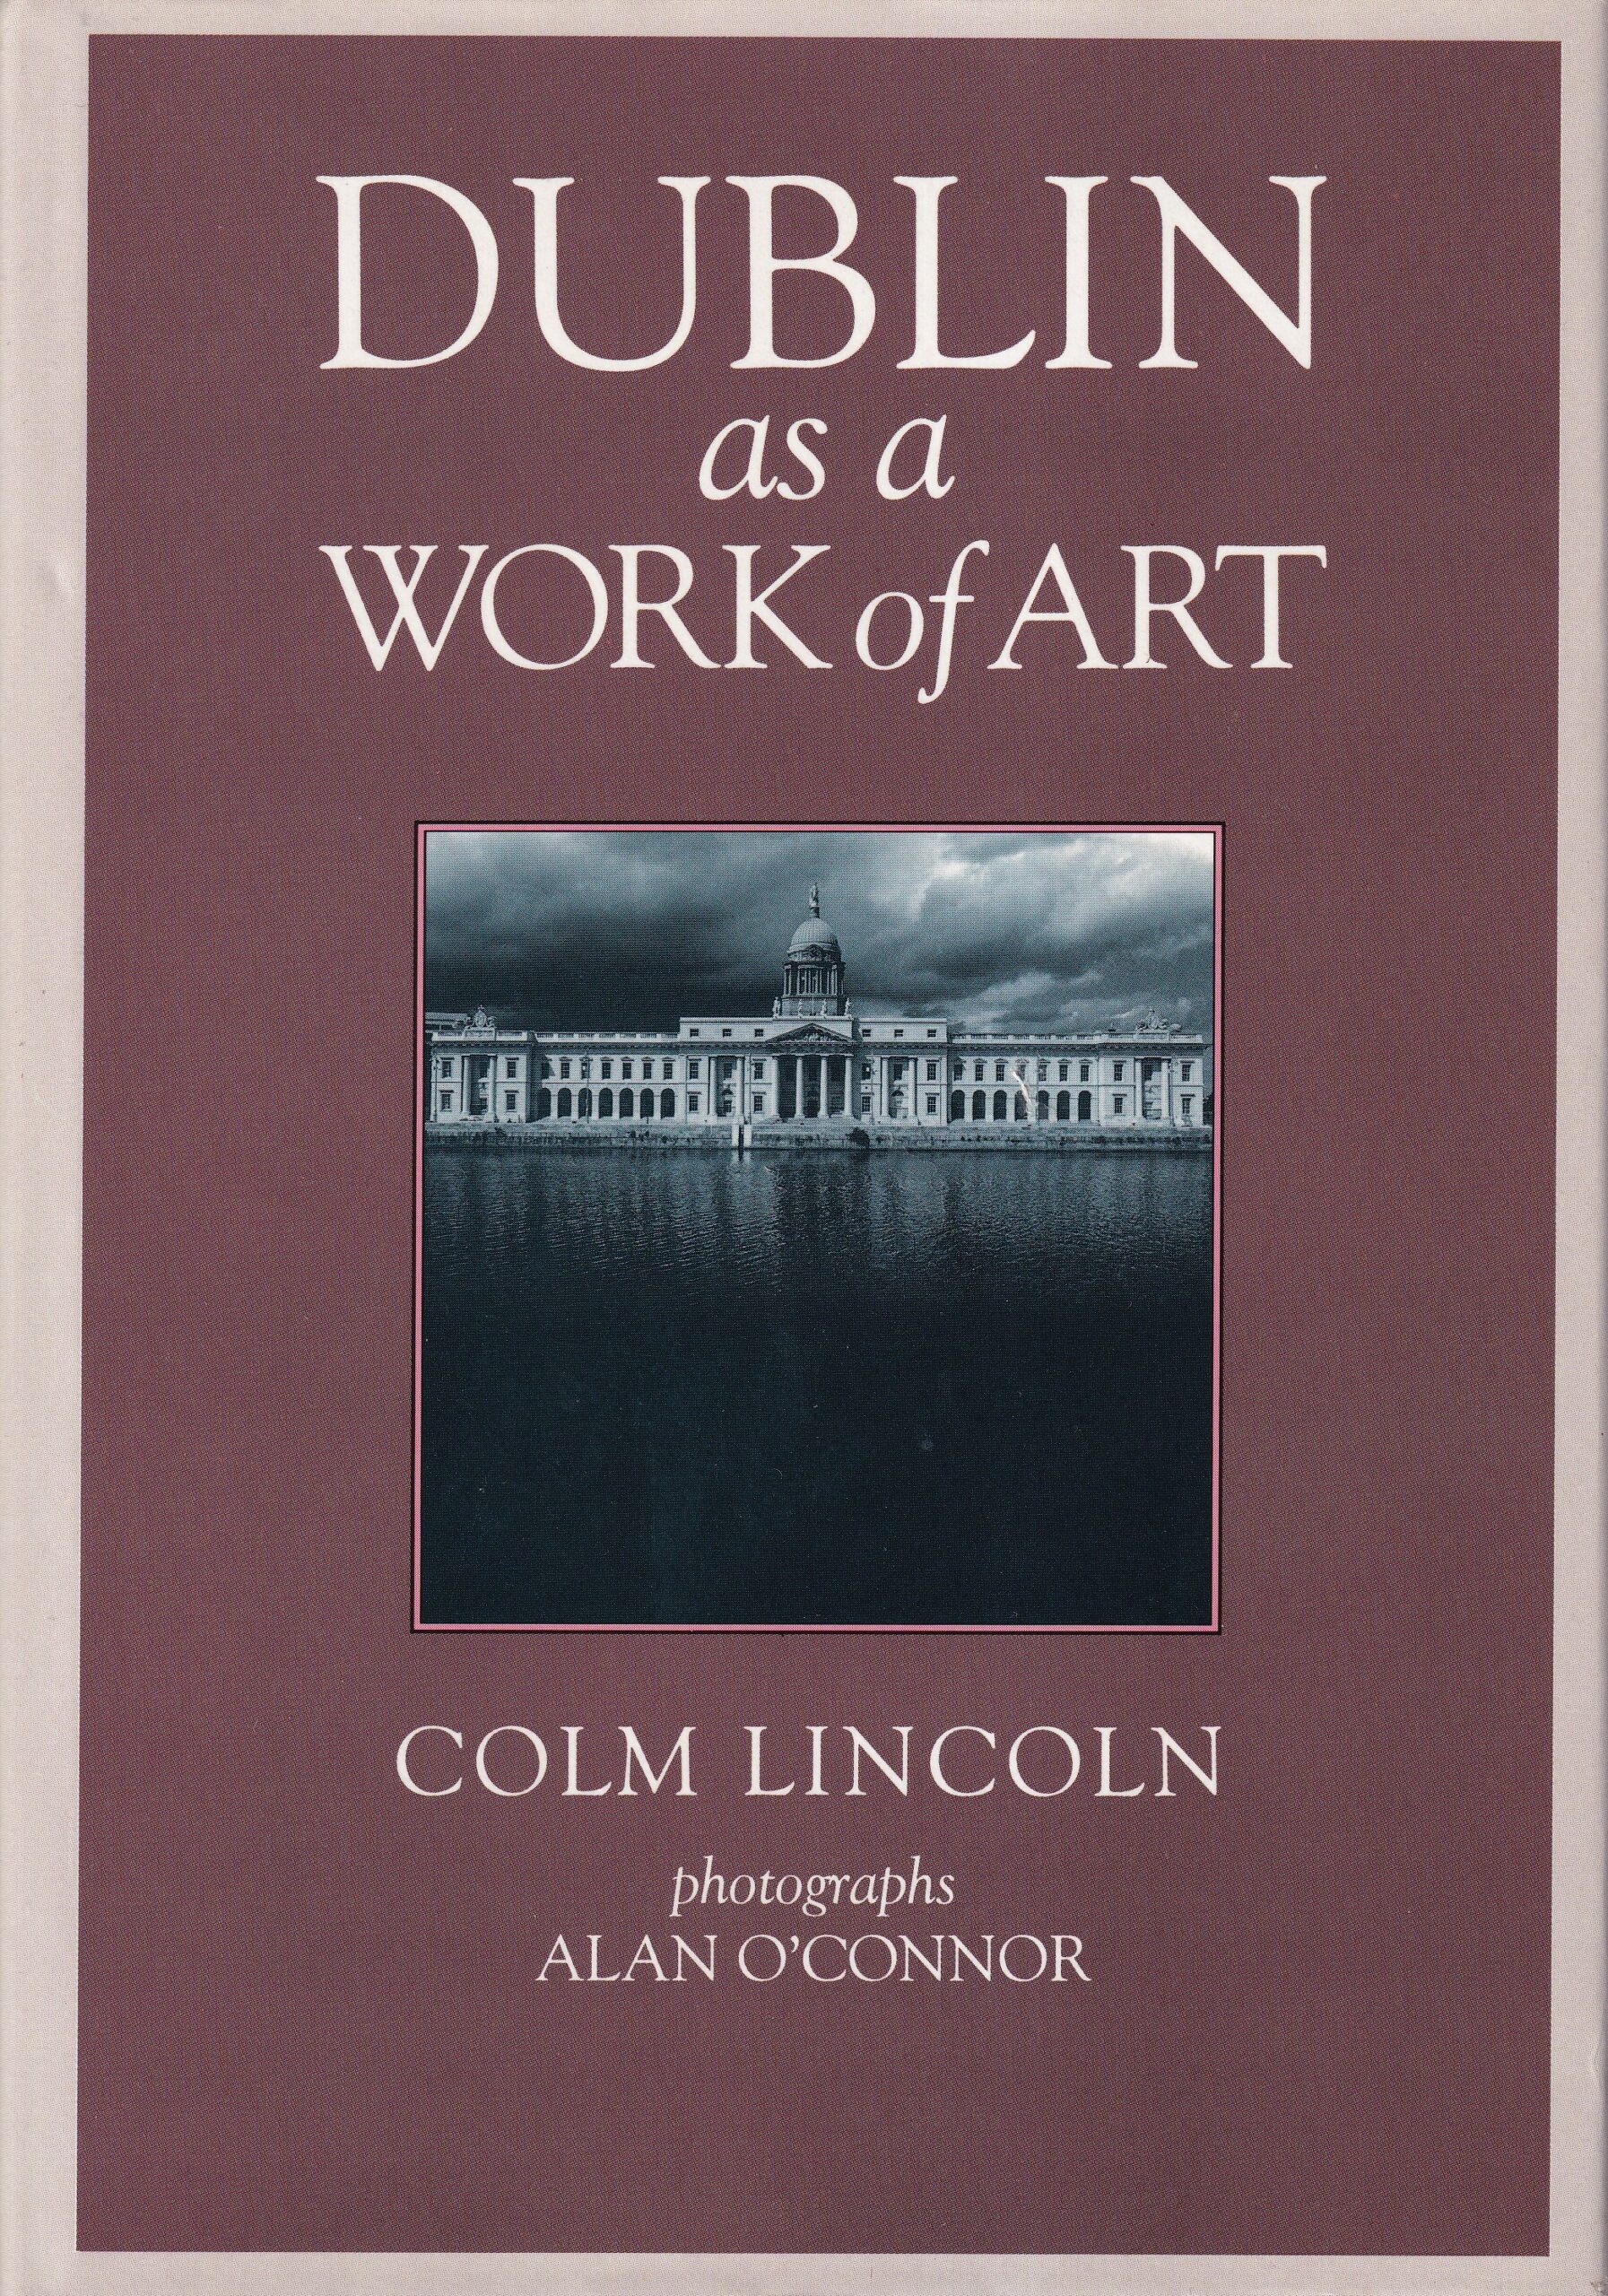 Dublin as a Work of Art | Colm Lincoln | Charlie Byrne's